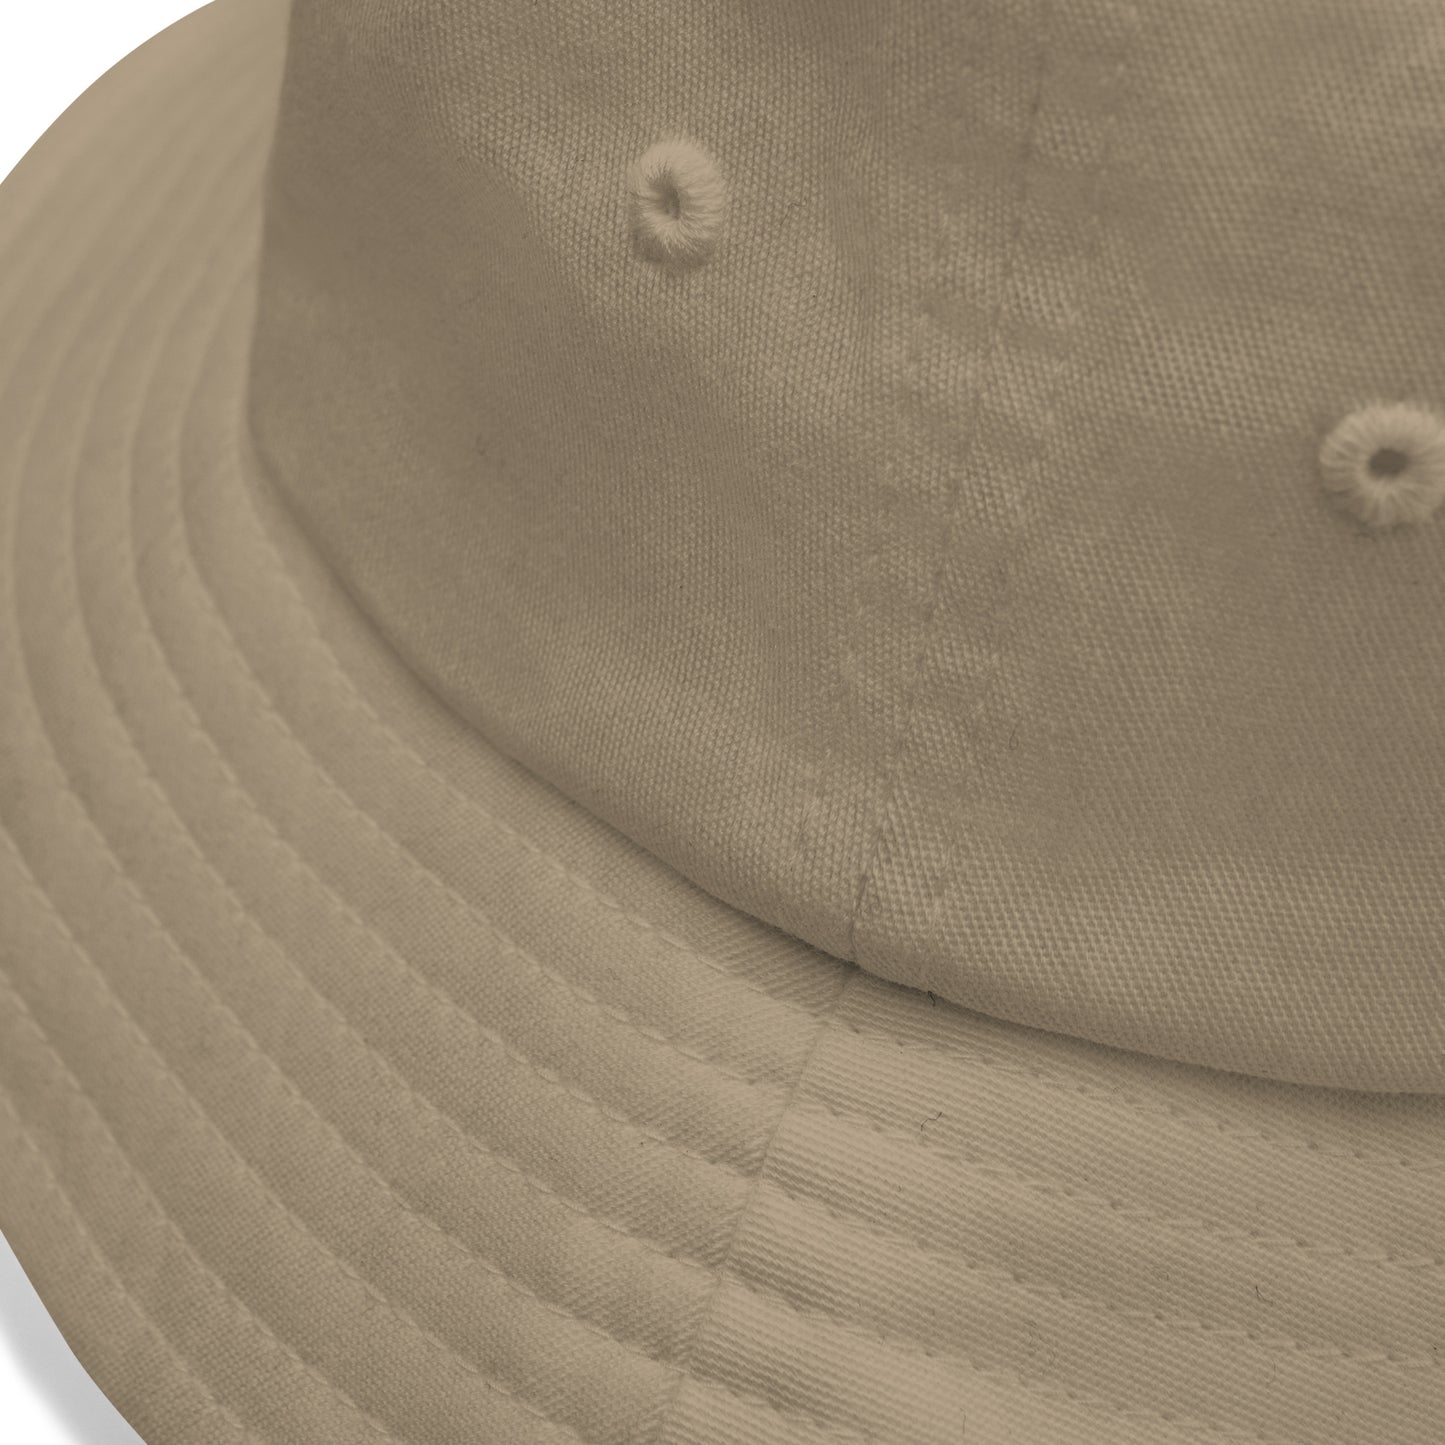 Tribe (INFLUENTIAL White) Old School Bucket Hat